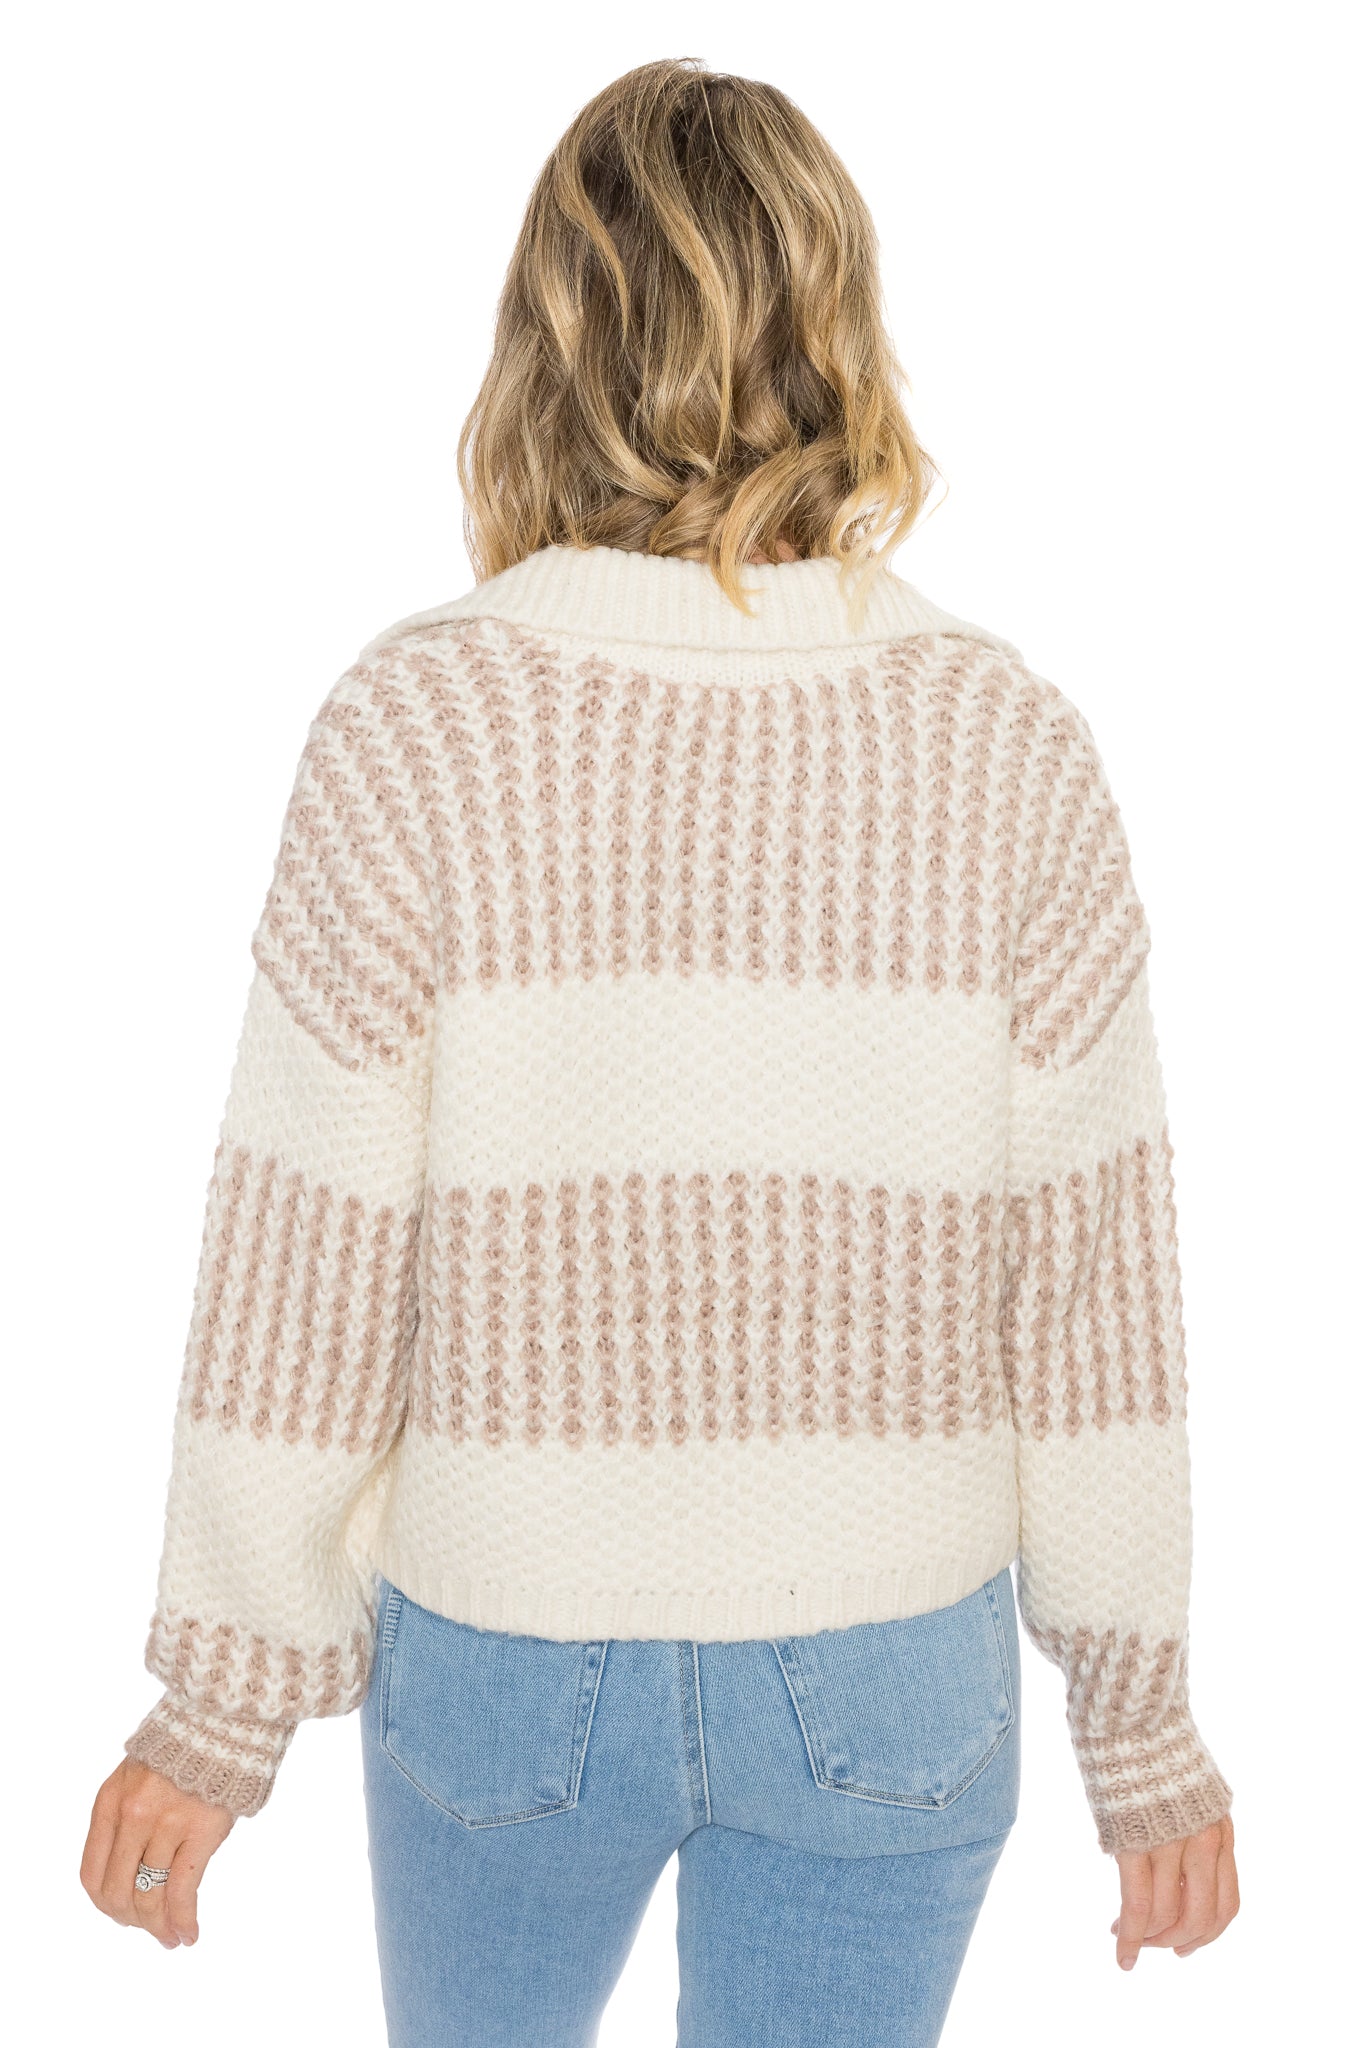 Levy Sweater by Gentle Fawn